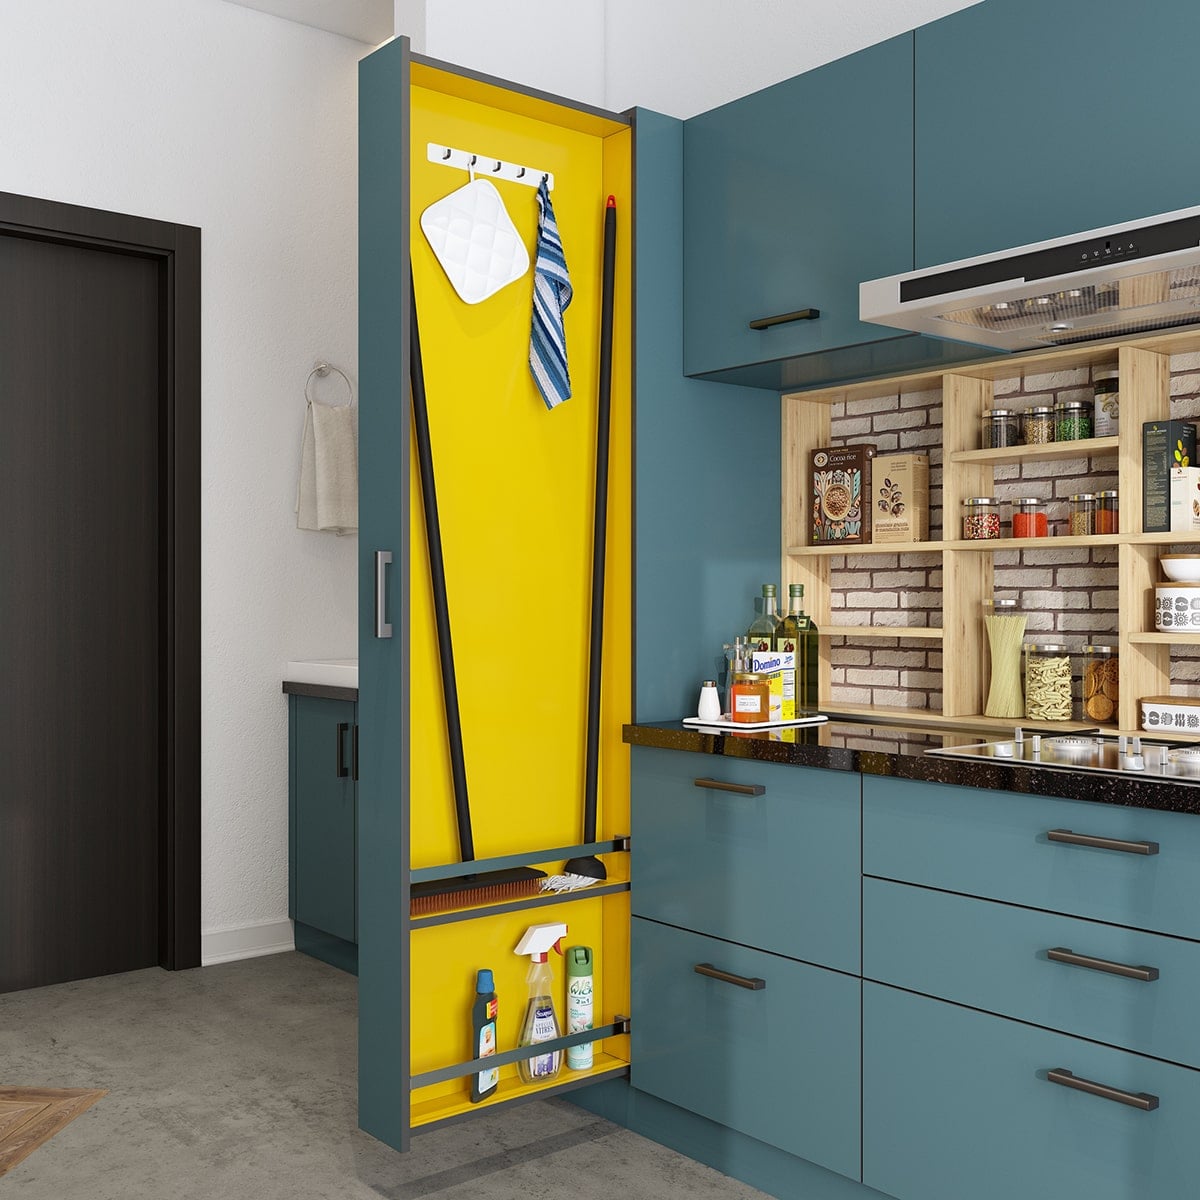 Kitchen Space Saving Janitor Pull Out Unit in simple kitchen design for small space